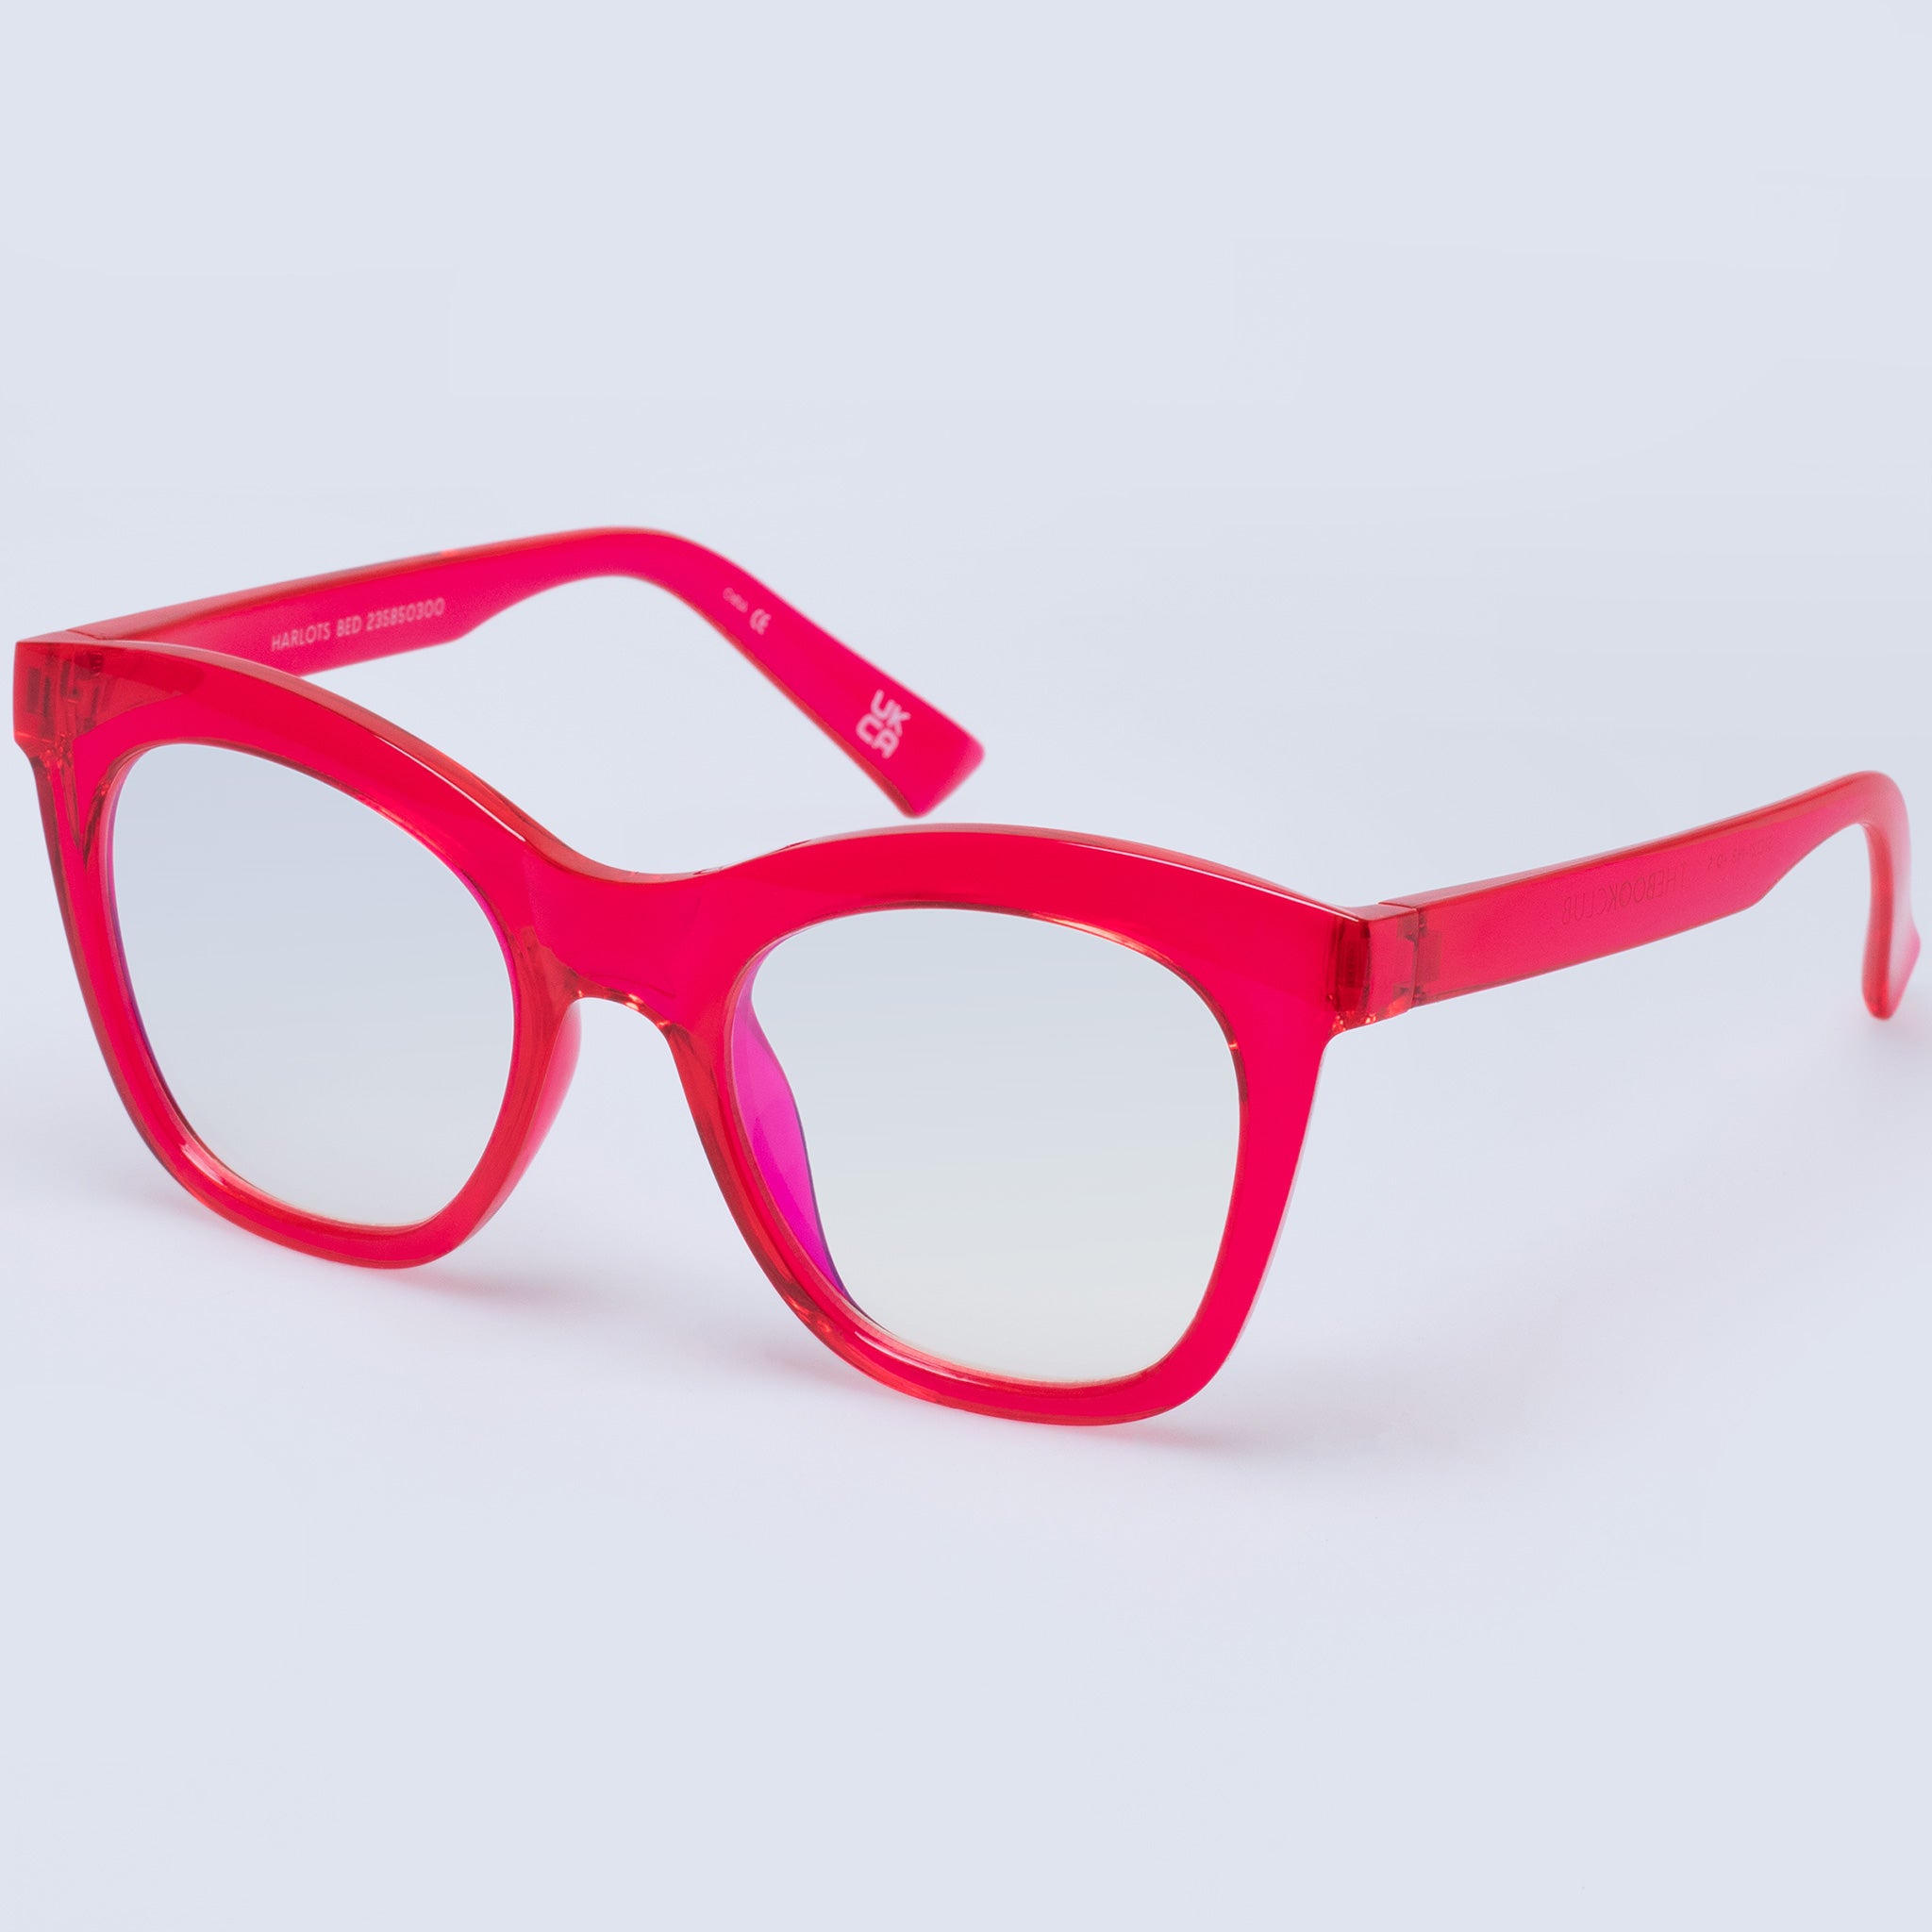 The Book Club "Harlots Bed" Blue Light Reading Glasses - Magenta